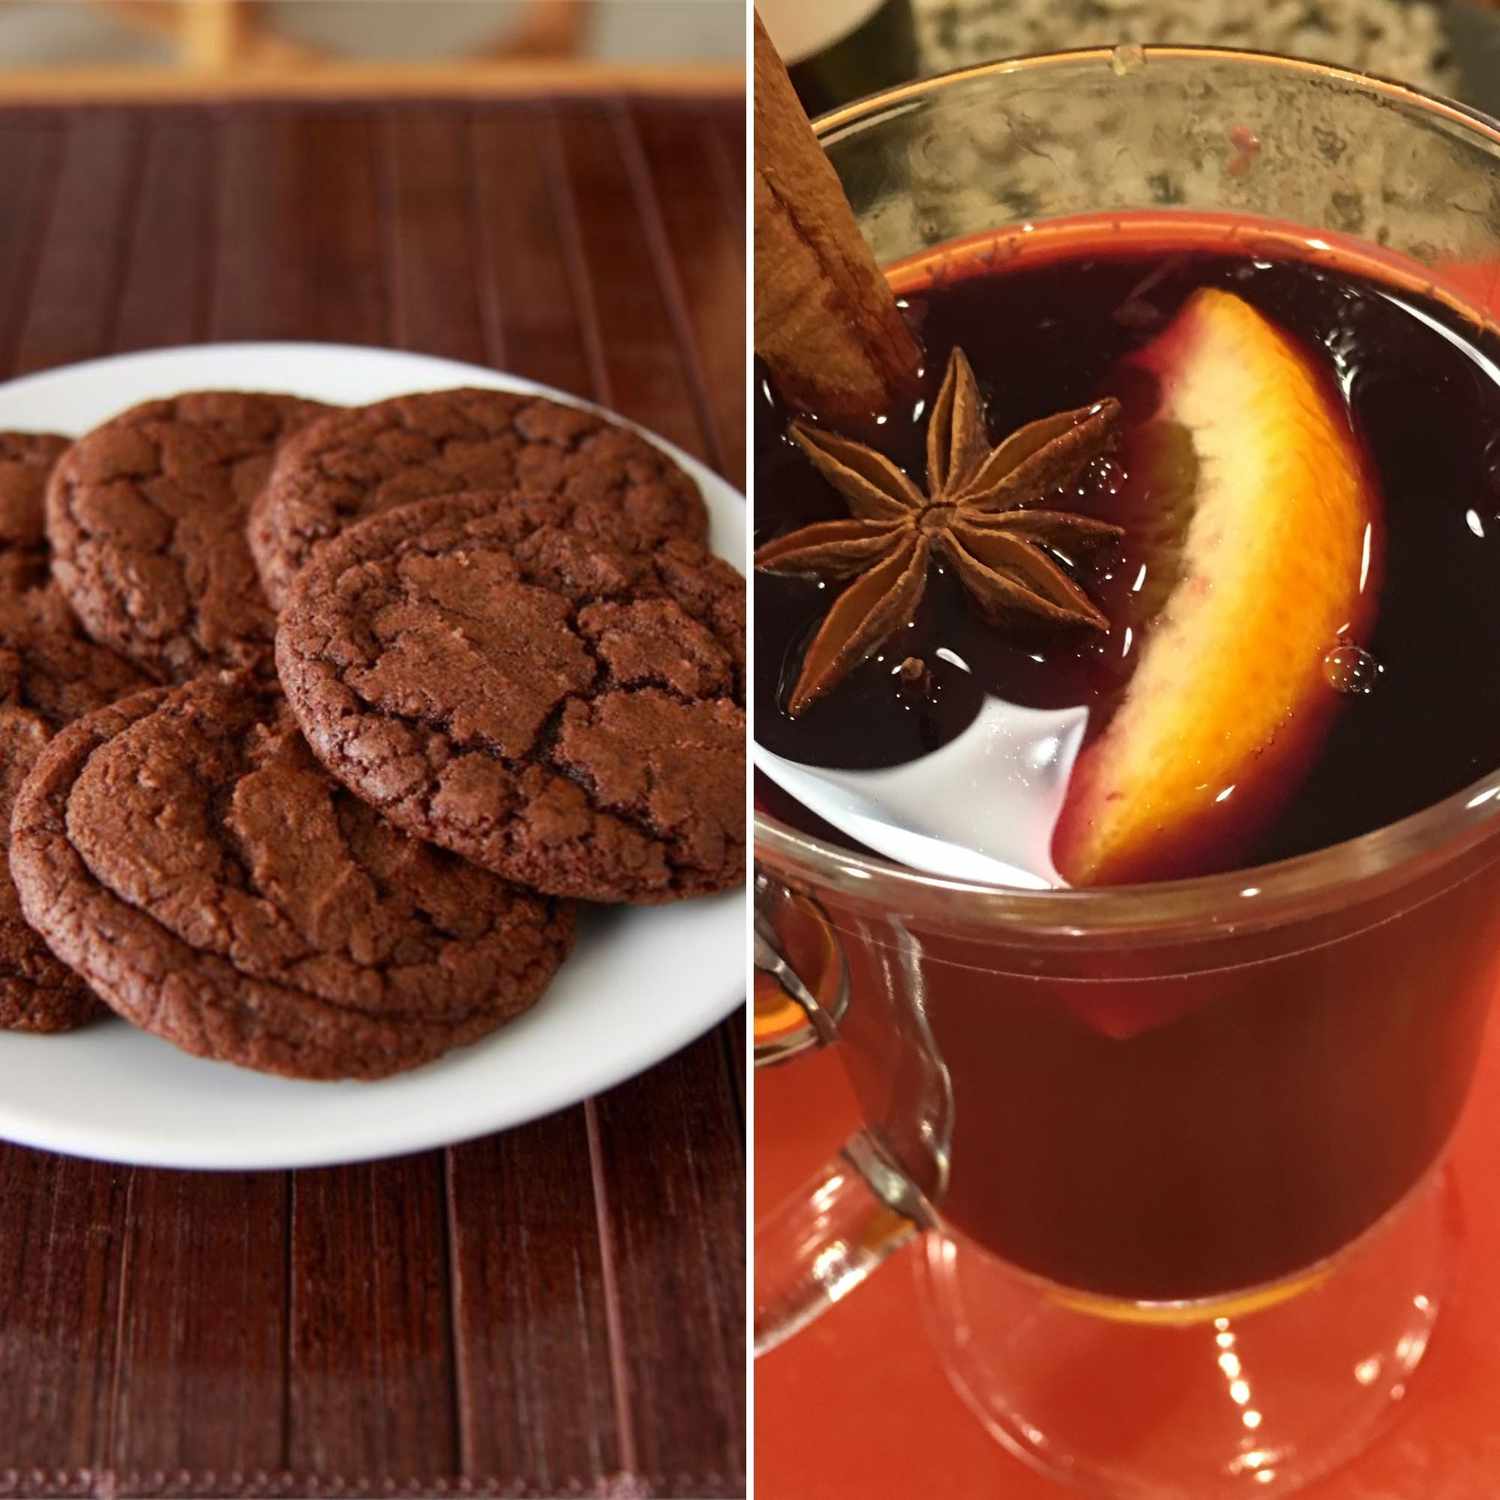 Chocolate Cookies and a mug of Mulled Wine